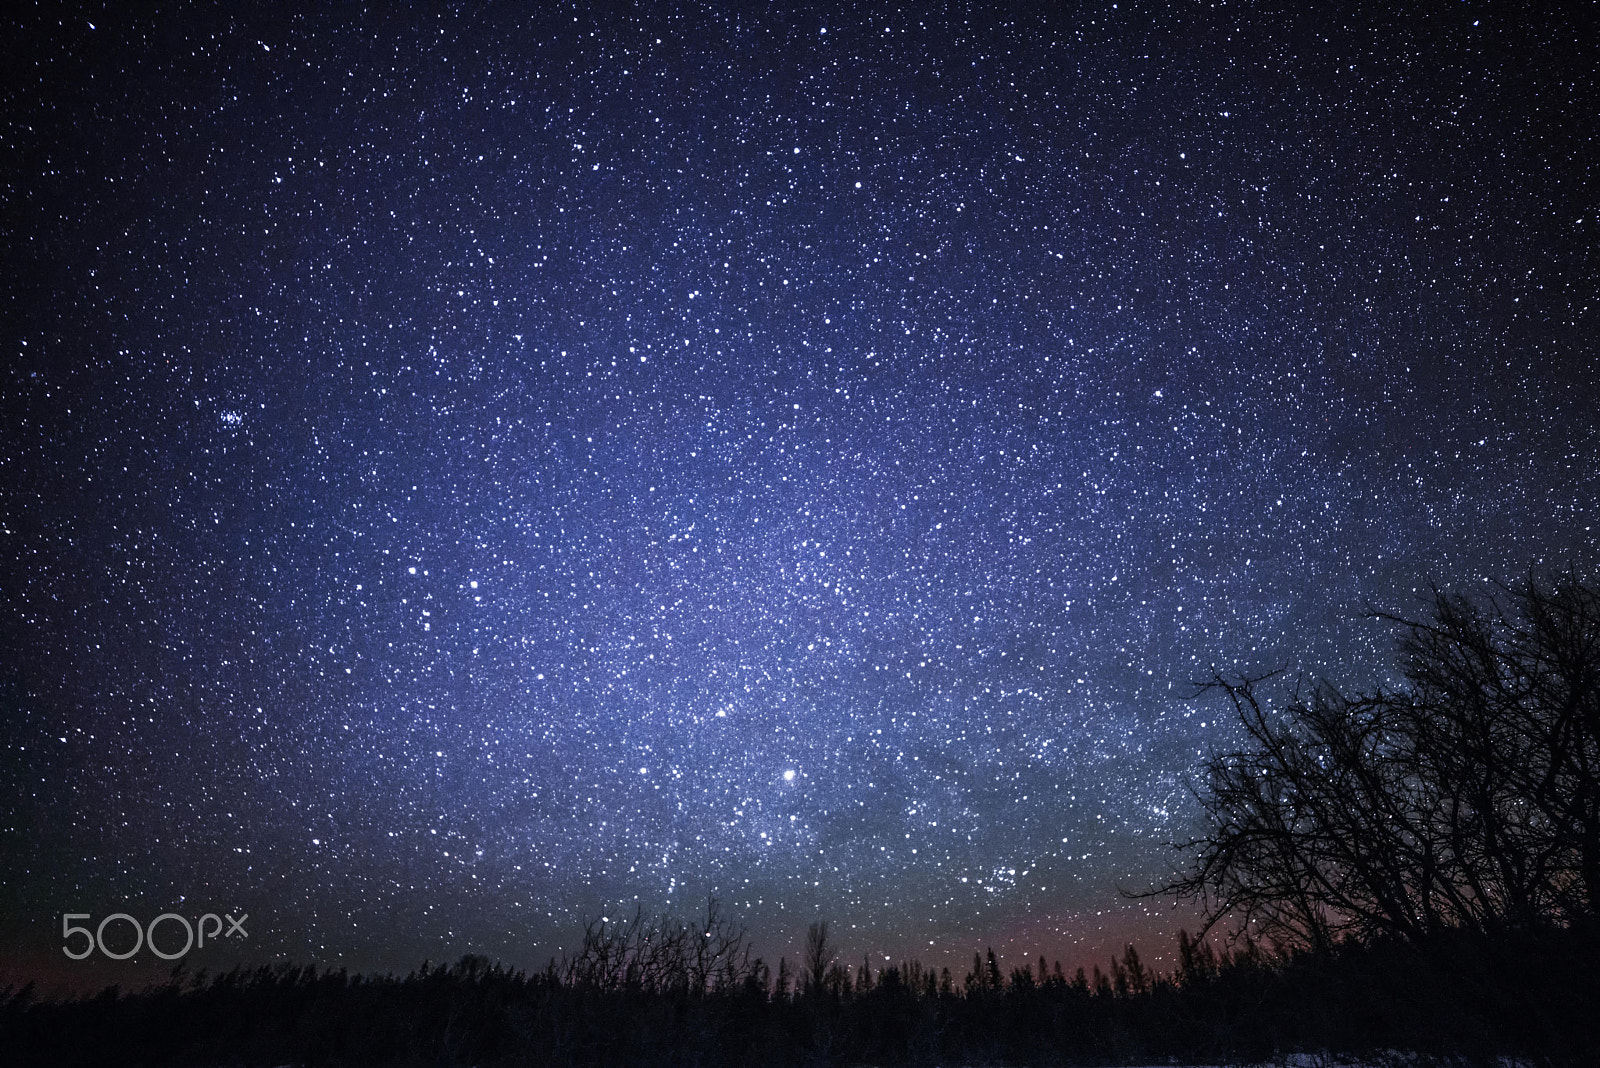 Nikon D800 sample photo. Rural winter landscape at night with trees and stars photography